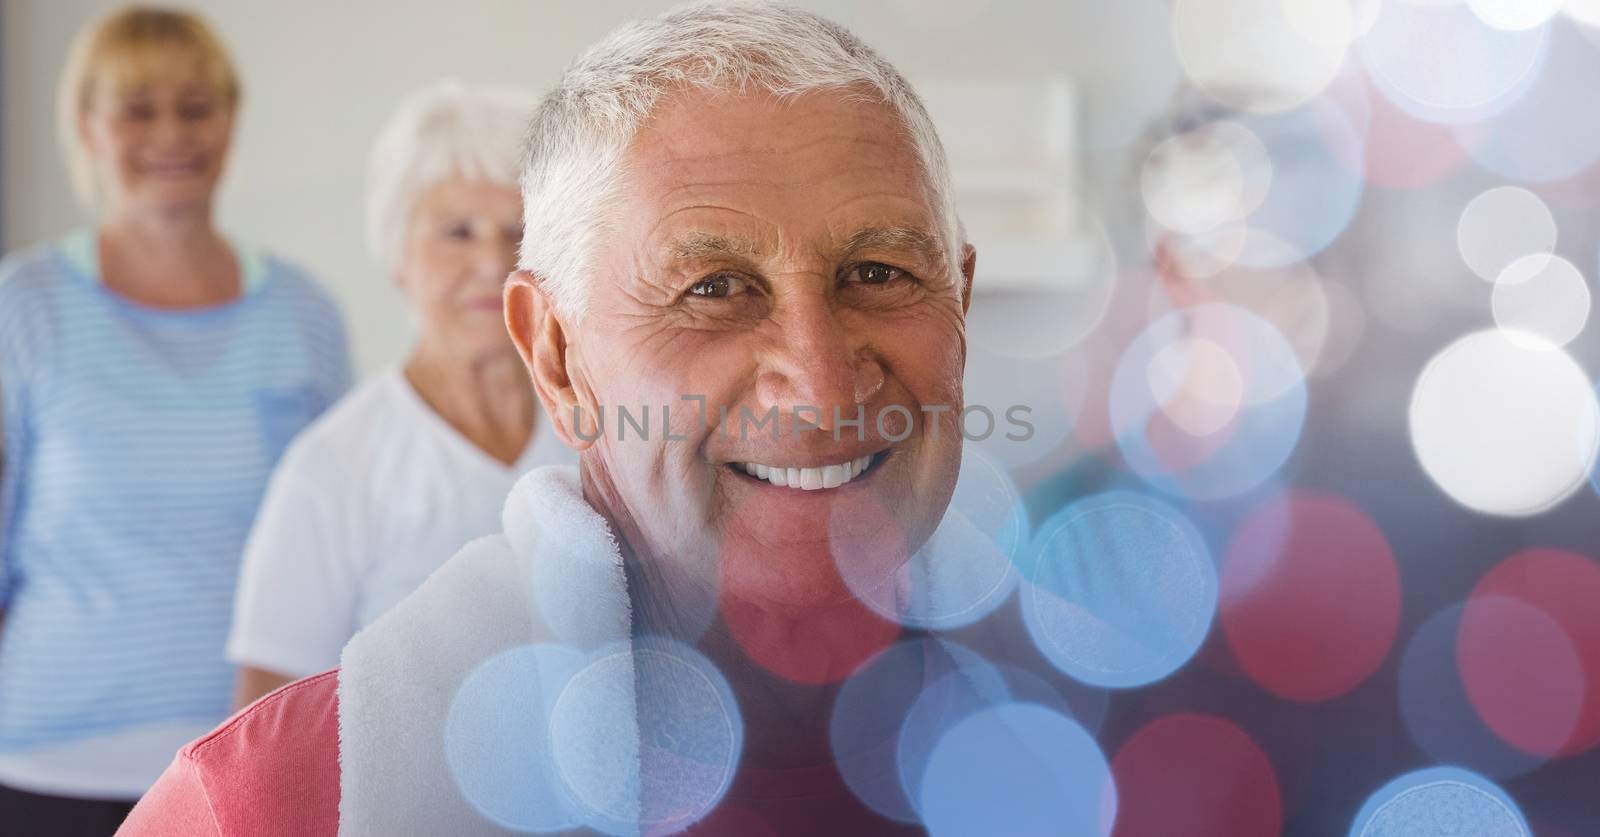 Digital composite of Smiling senior man with friends in yoga class